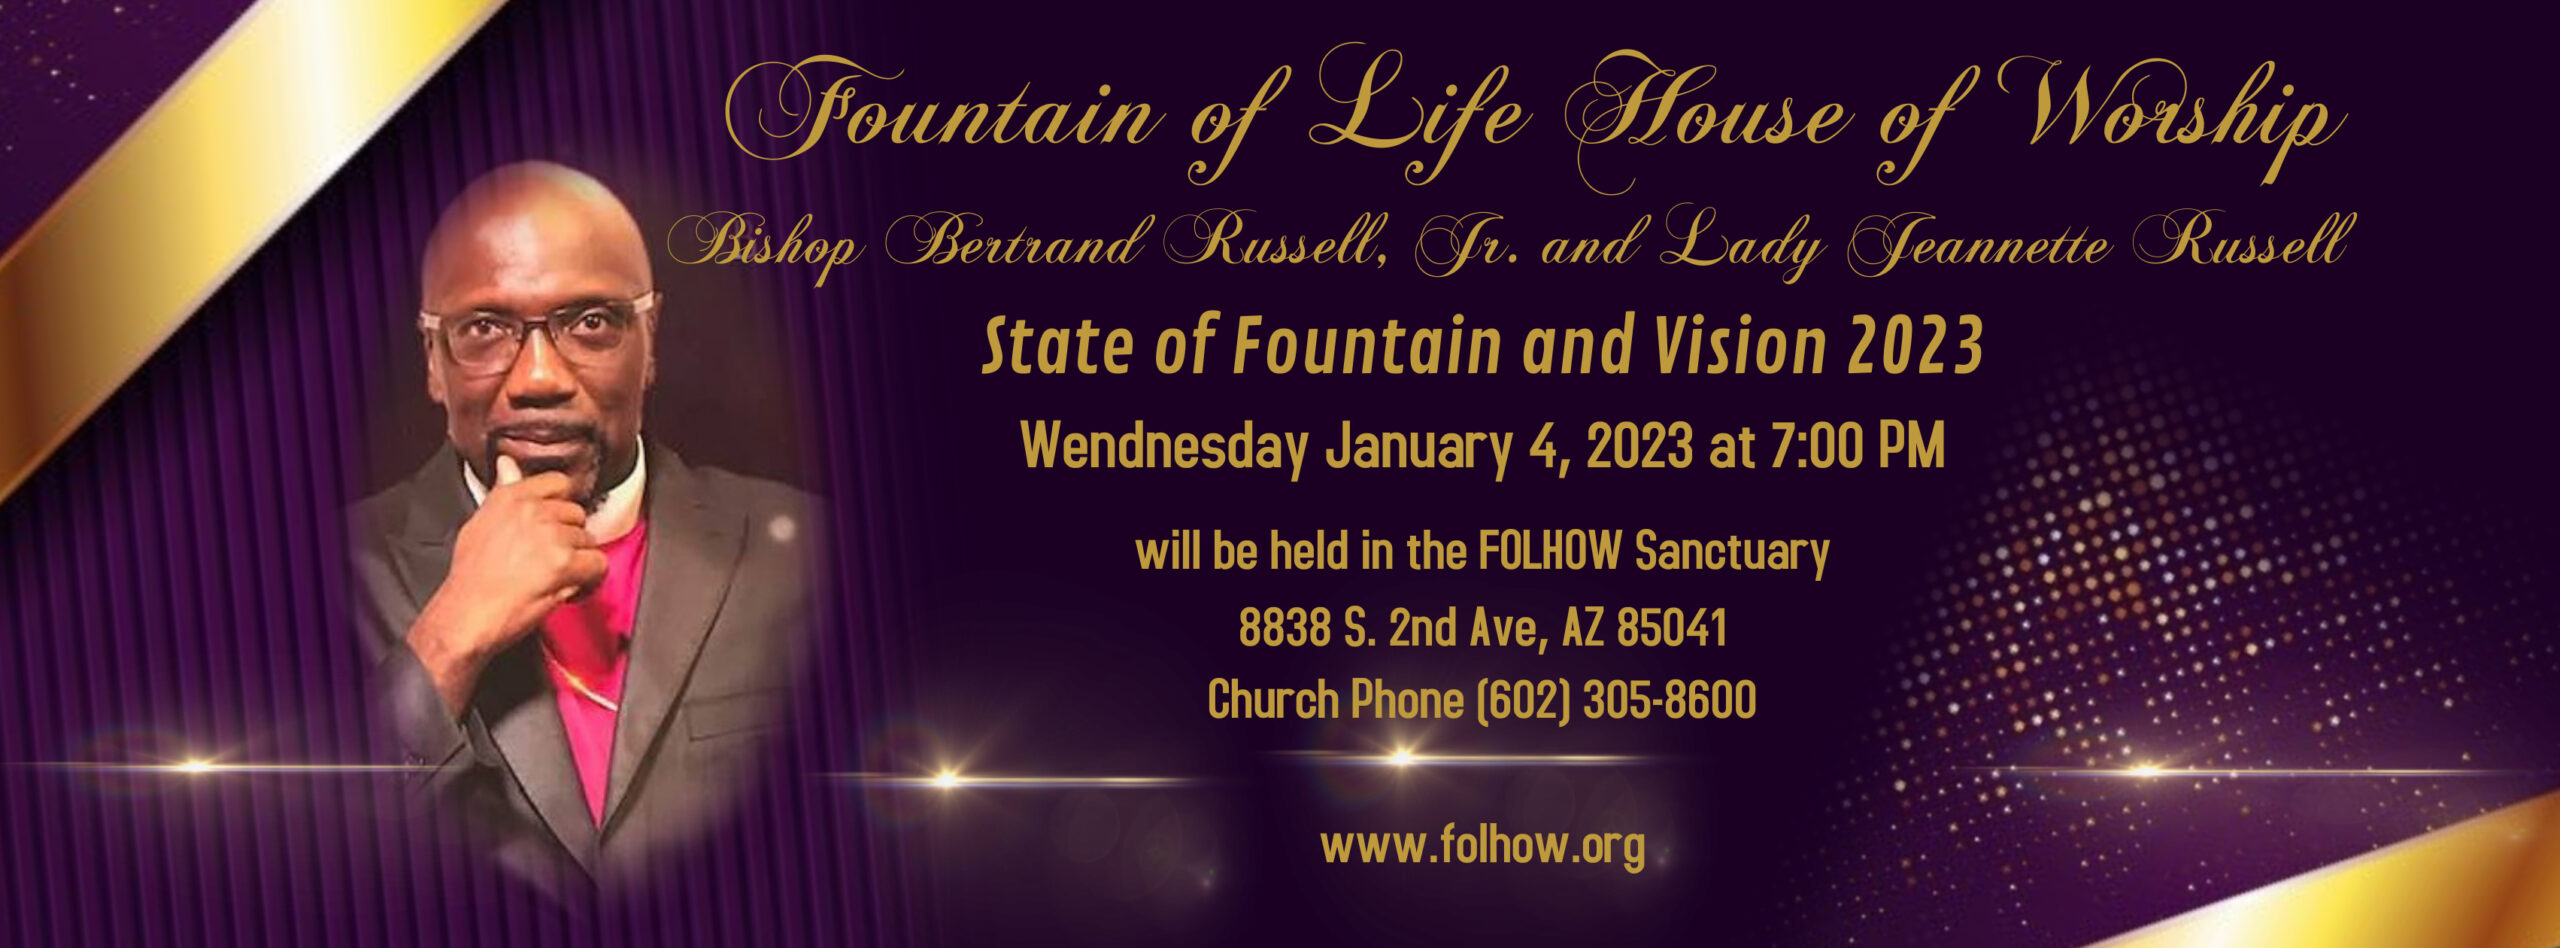 State of Fountain & Vision 2023 - Jan. 4